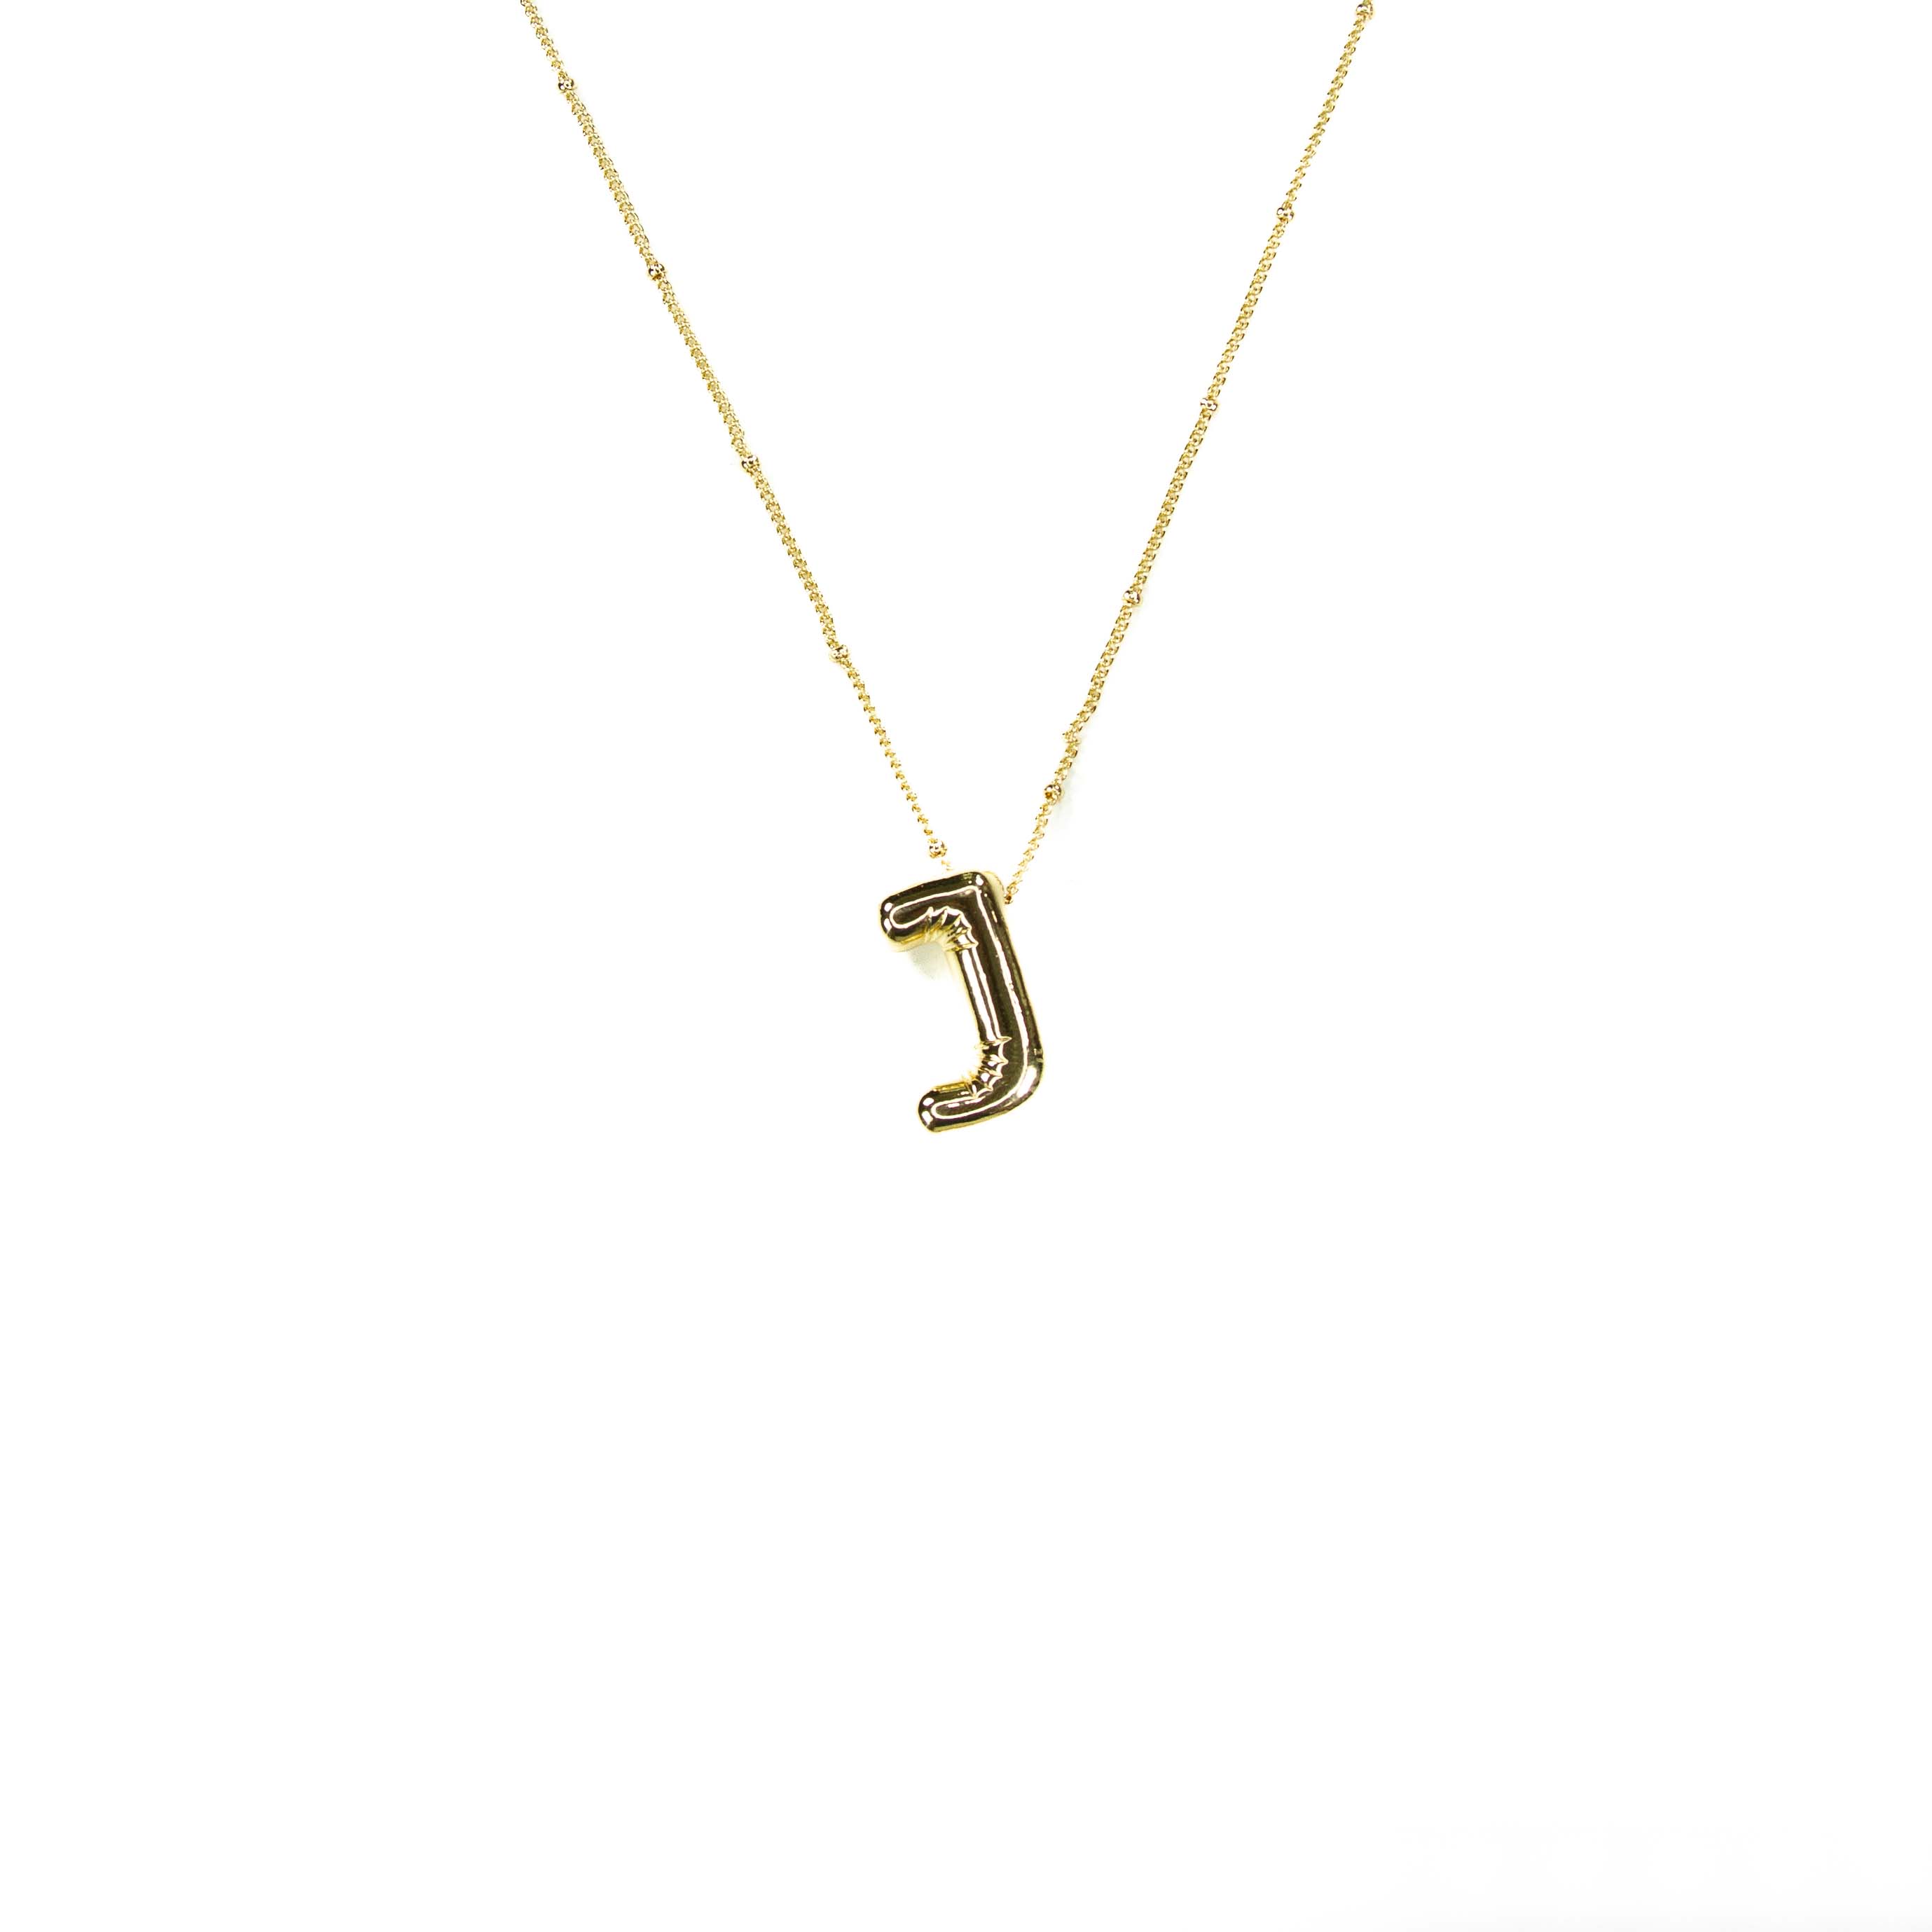 BIG Initial Balloon Bubble 18K Gold Necklace